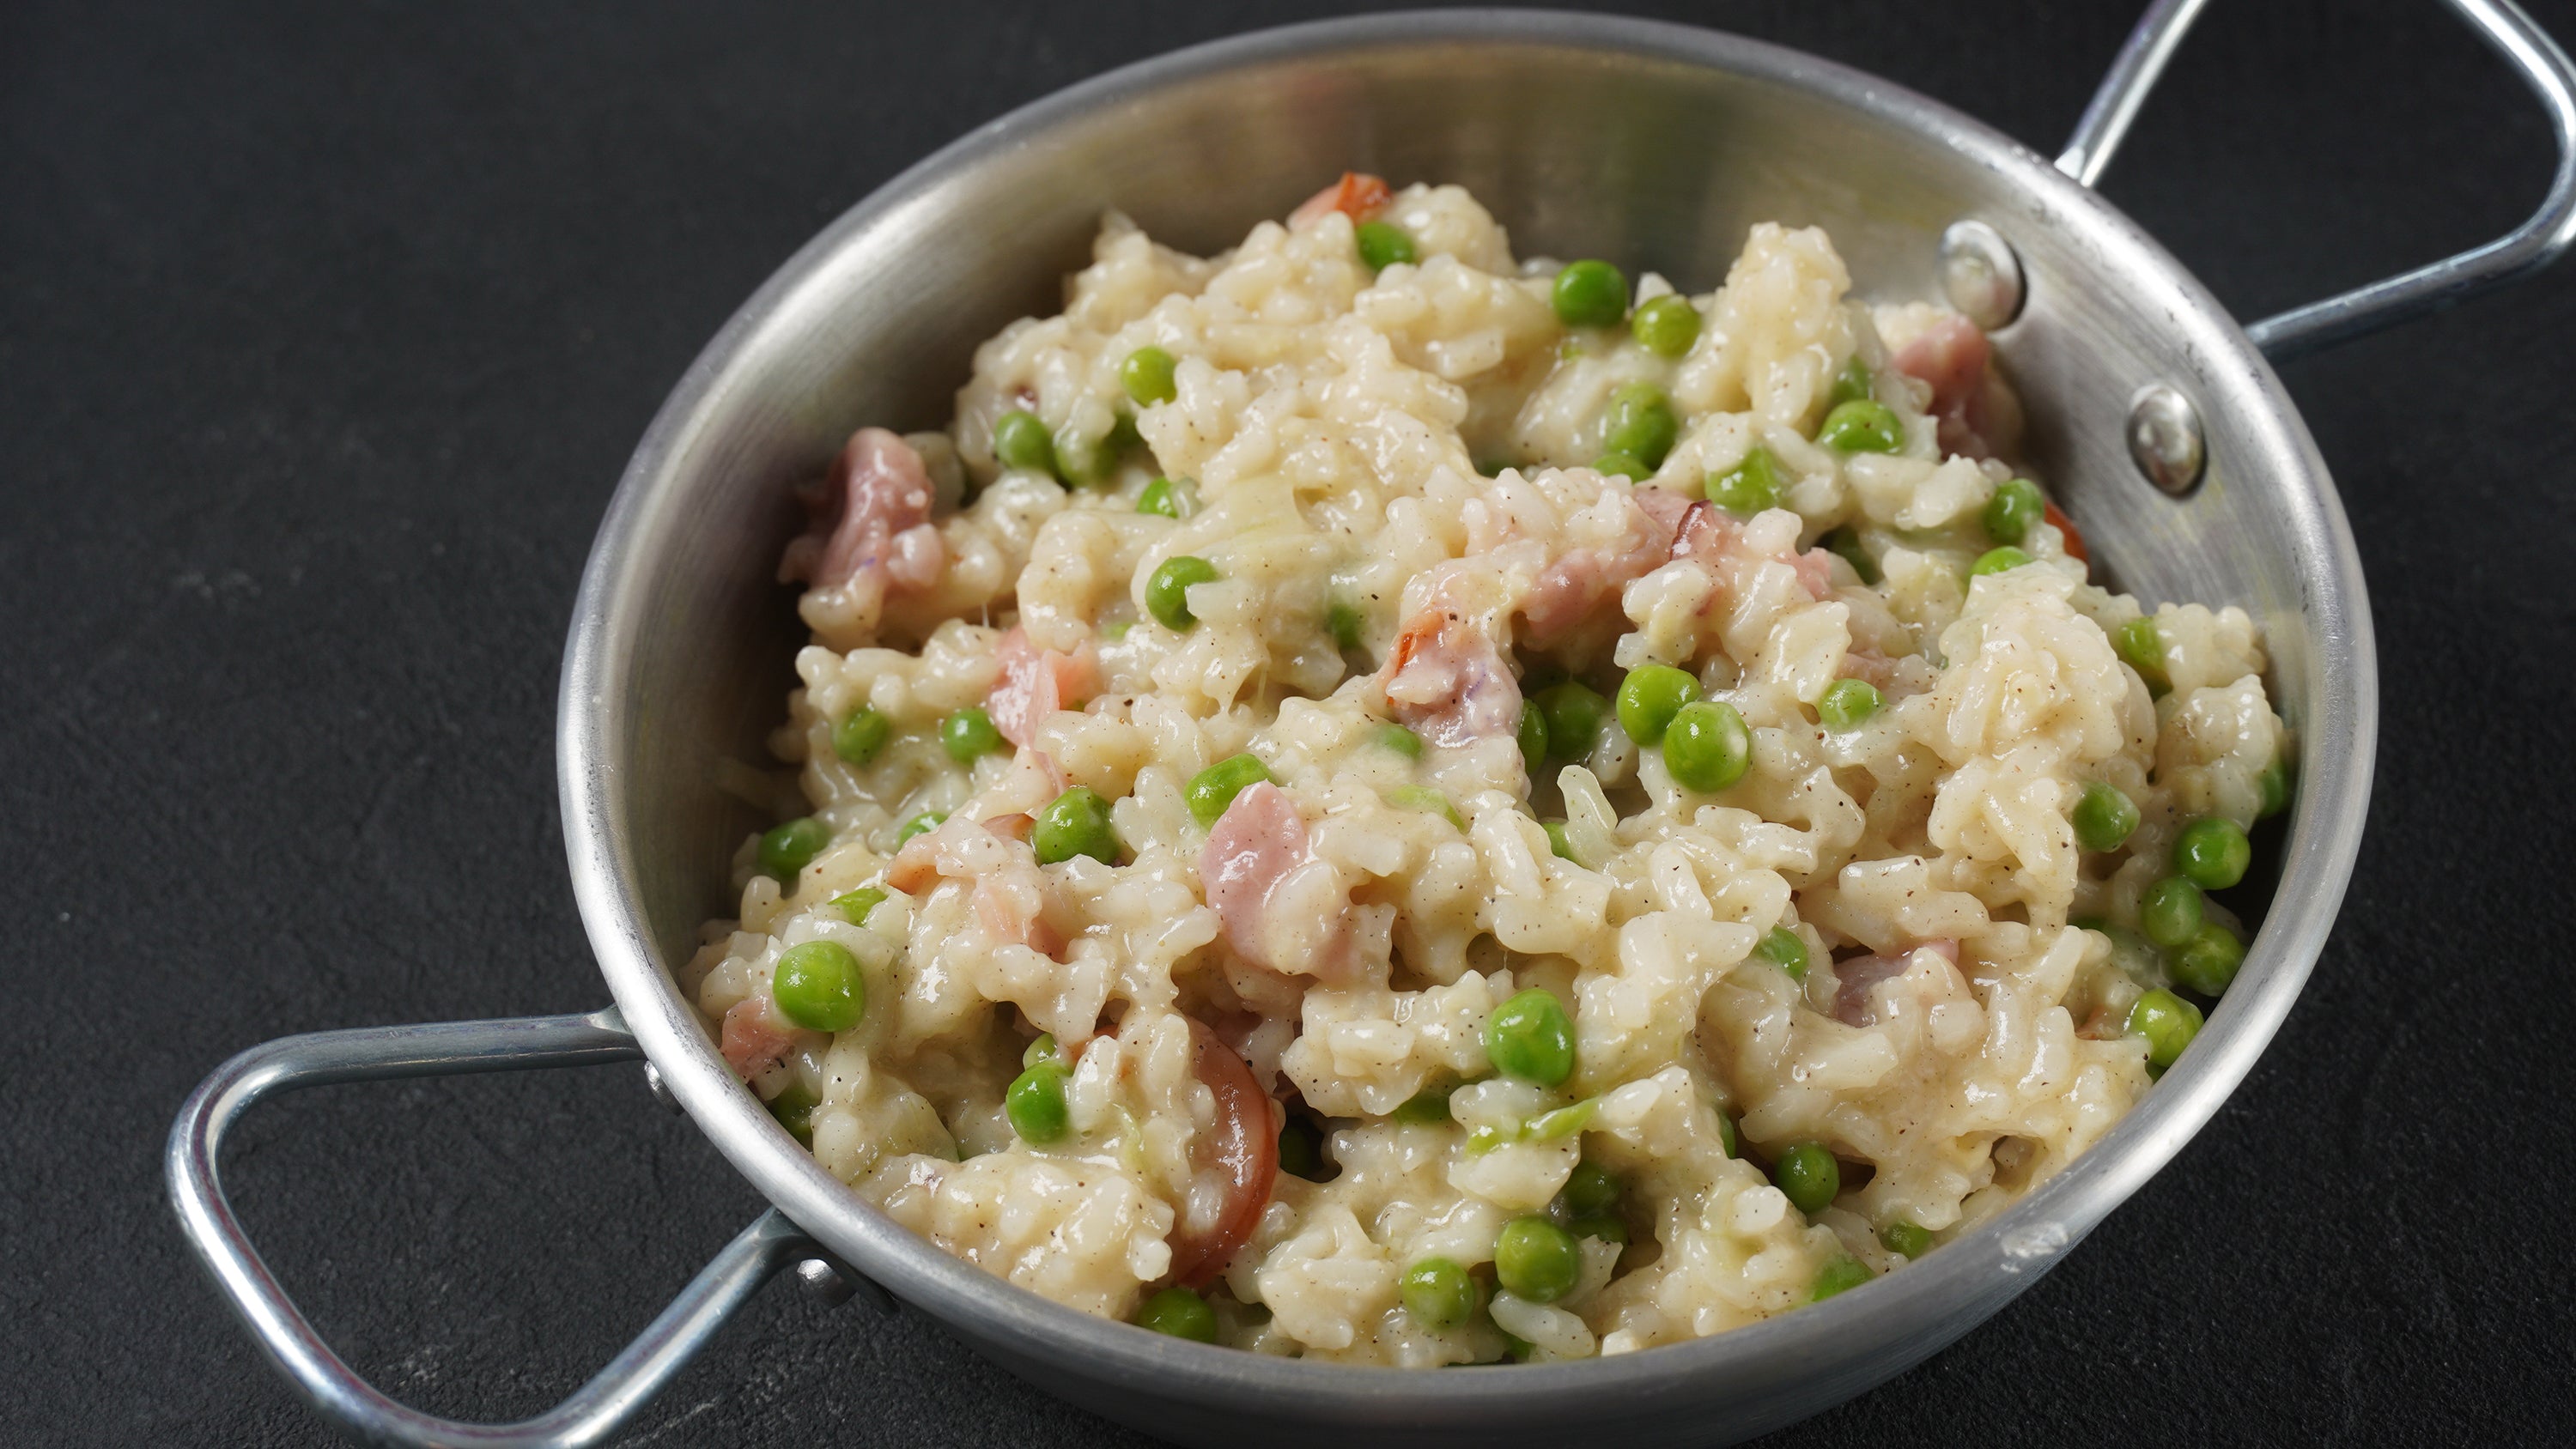 Risotto with Peas and Prosciutto is a creamy and flavorful rice dish made with Arborio rice, peas, prosciutto, and Parmesan cheese.